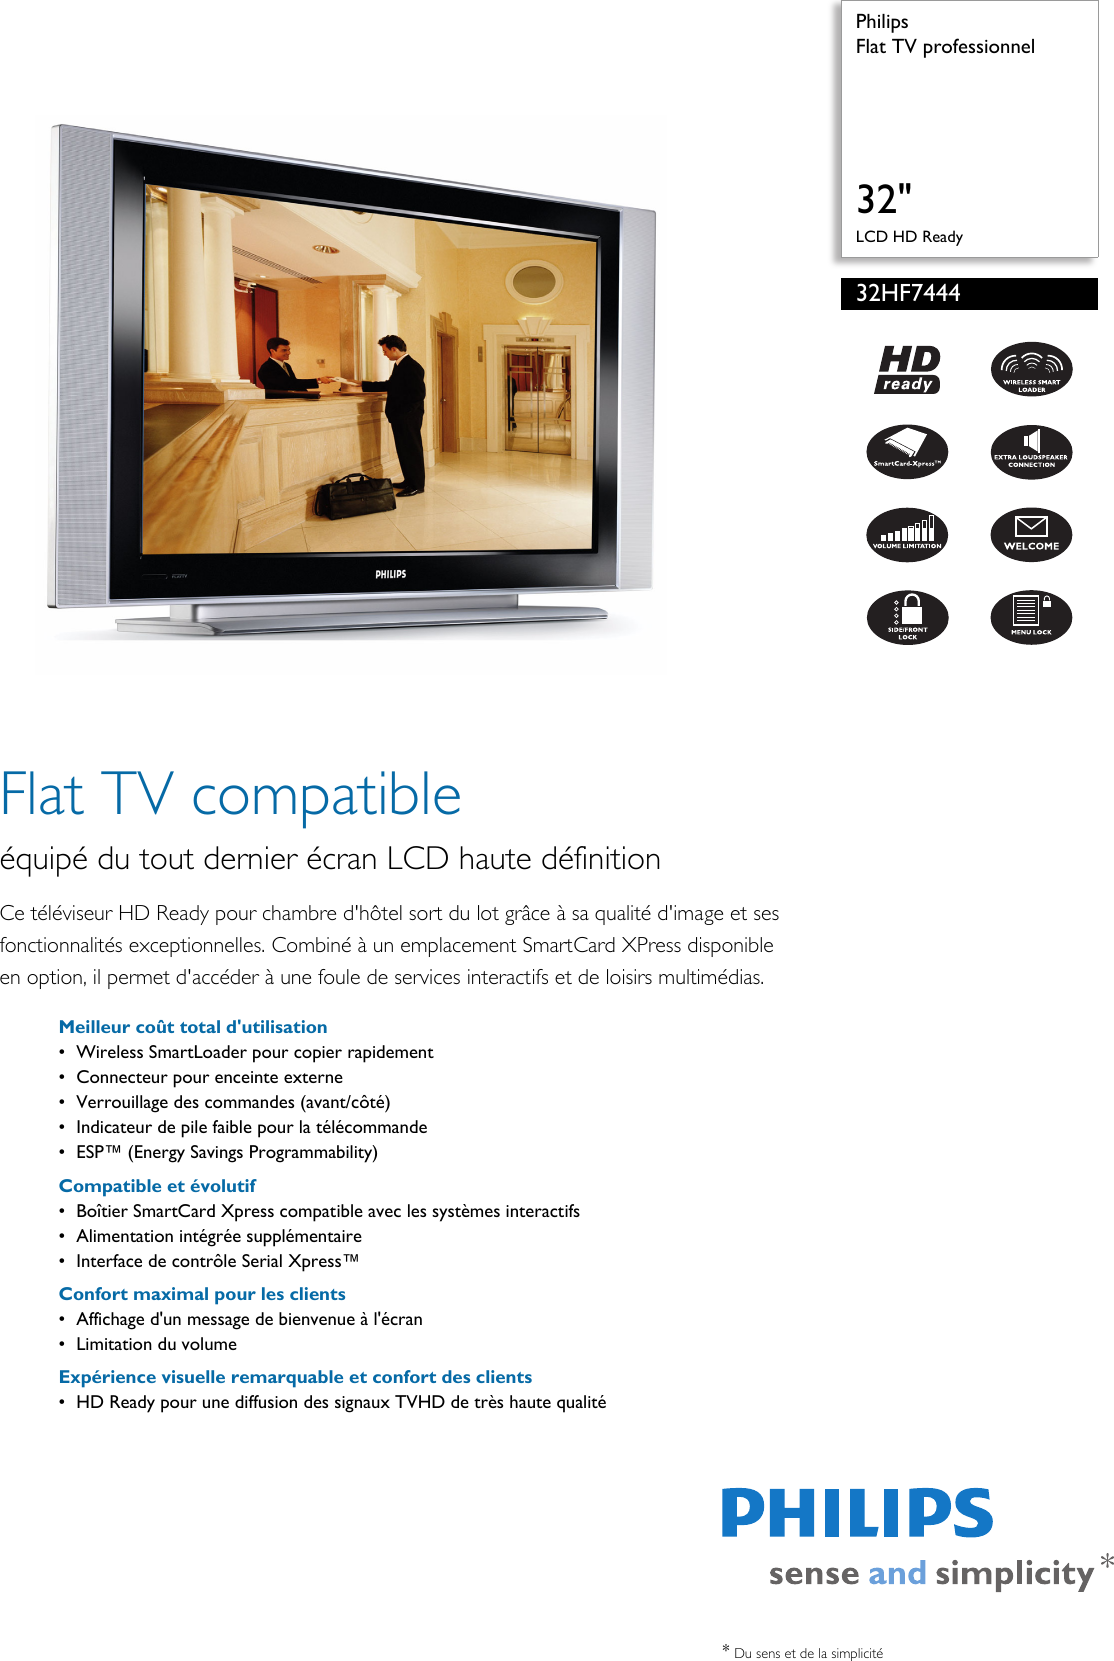 Page 1 of 2 - Philips 32HF7444/10 Flat TV Professionnel User Manual Fiche Produit 32hf7444 10 Pss Frabe